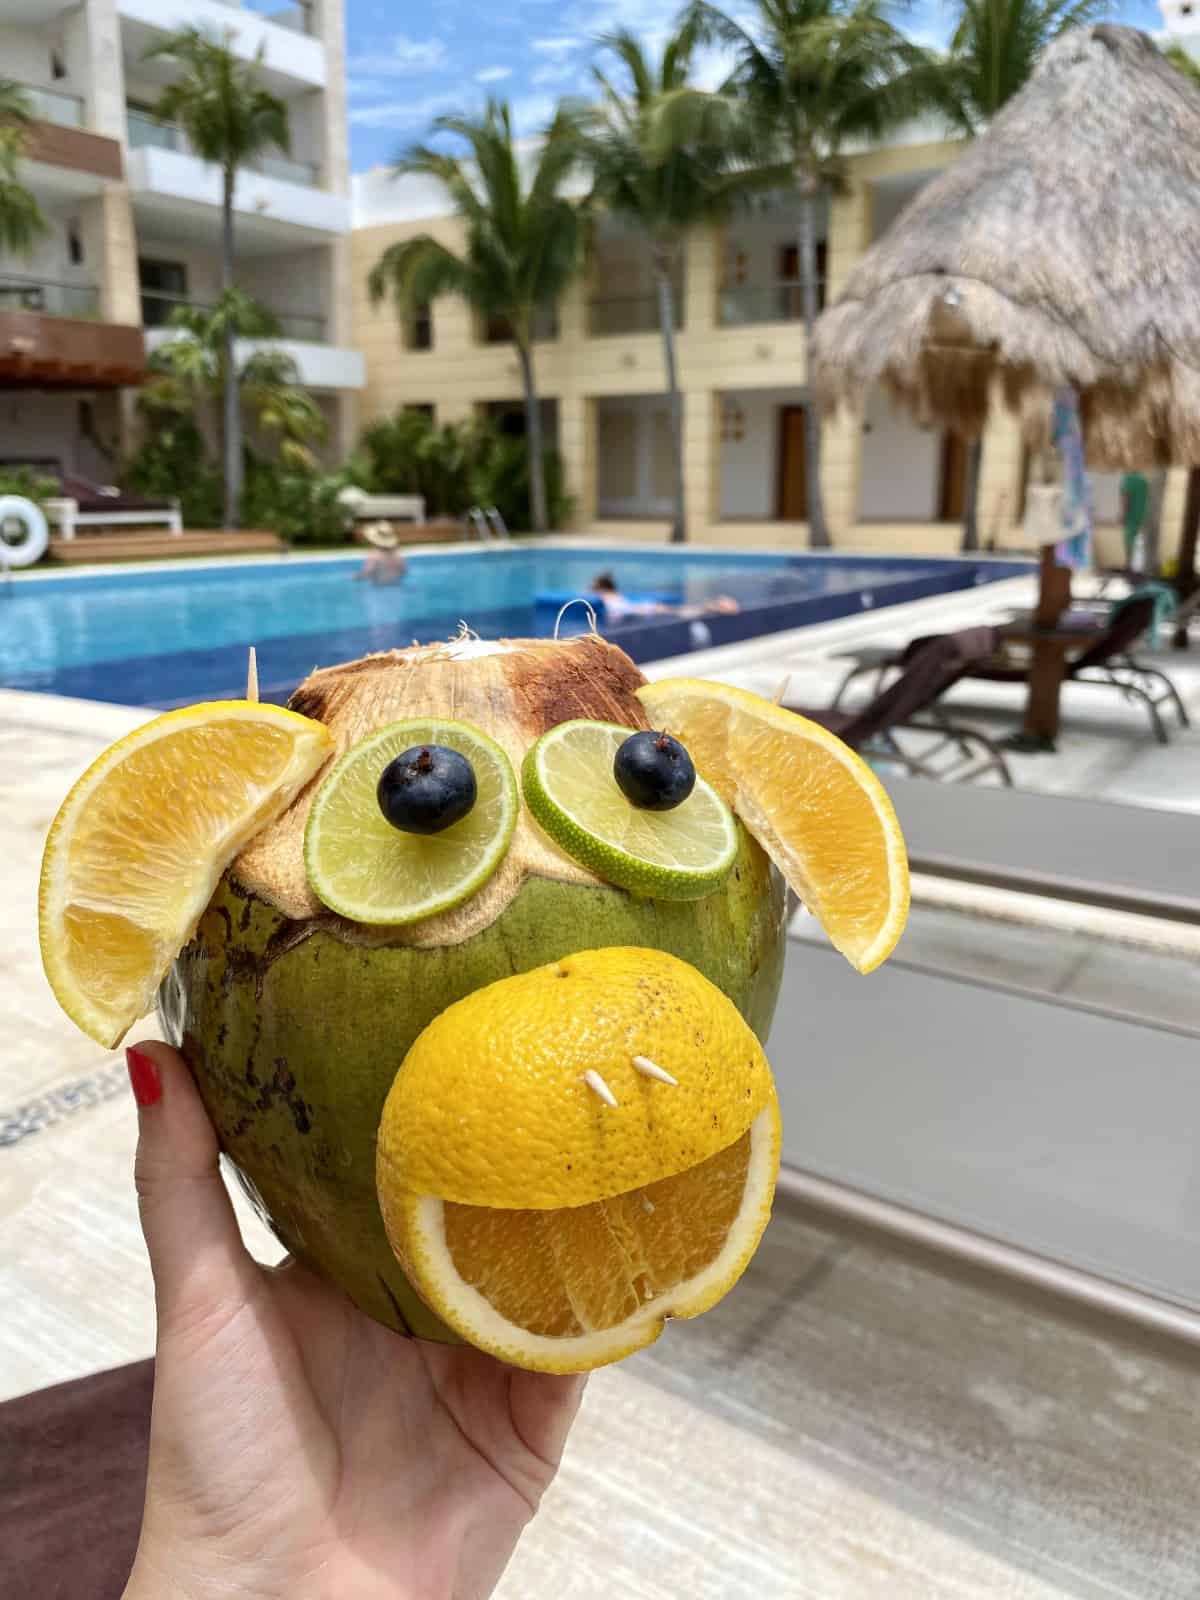 Best luxury all-inclusive resorts in Mexico, Caribbean, Costa Rica - Excellence Playa Mujeres (EPM) is a great adults-only option - coconut monkey drink